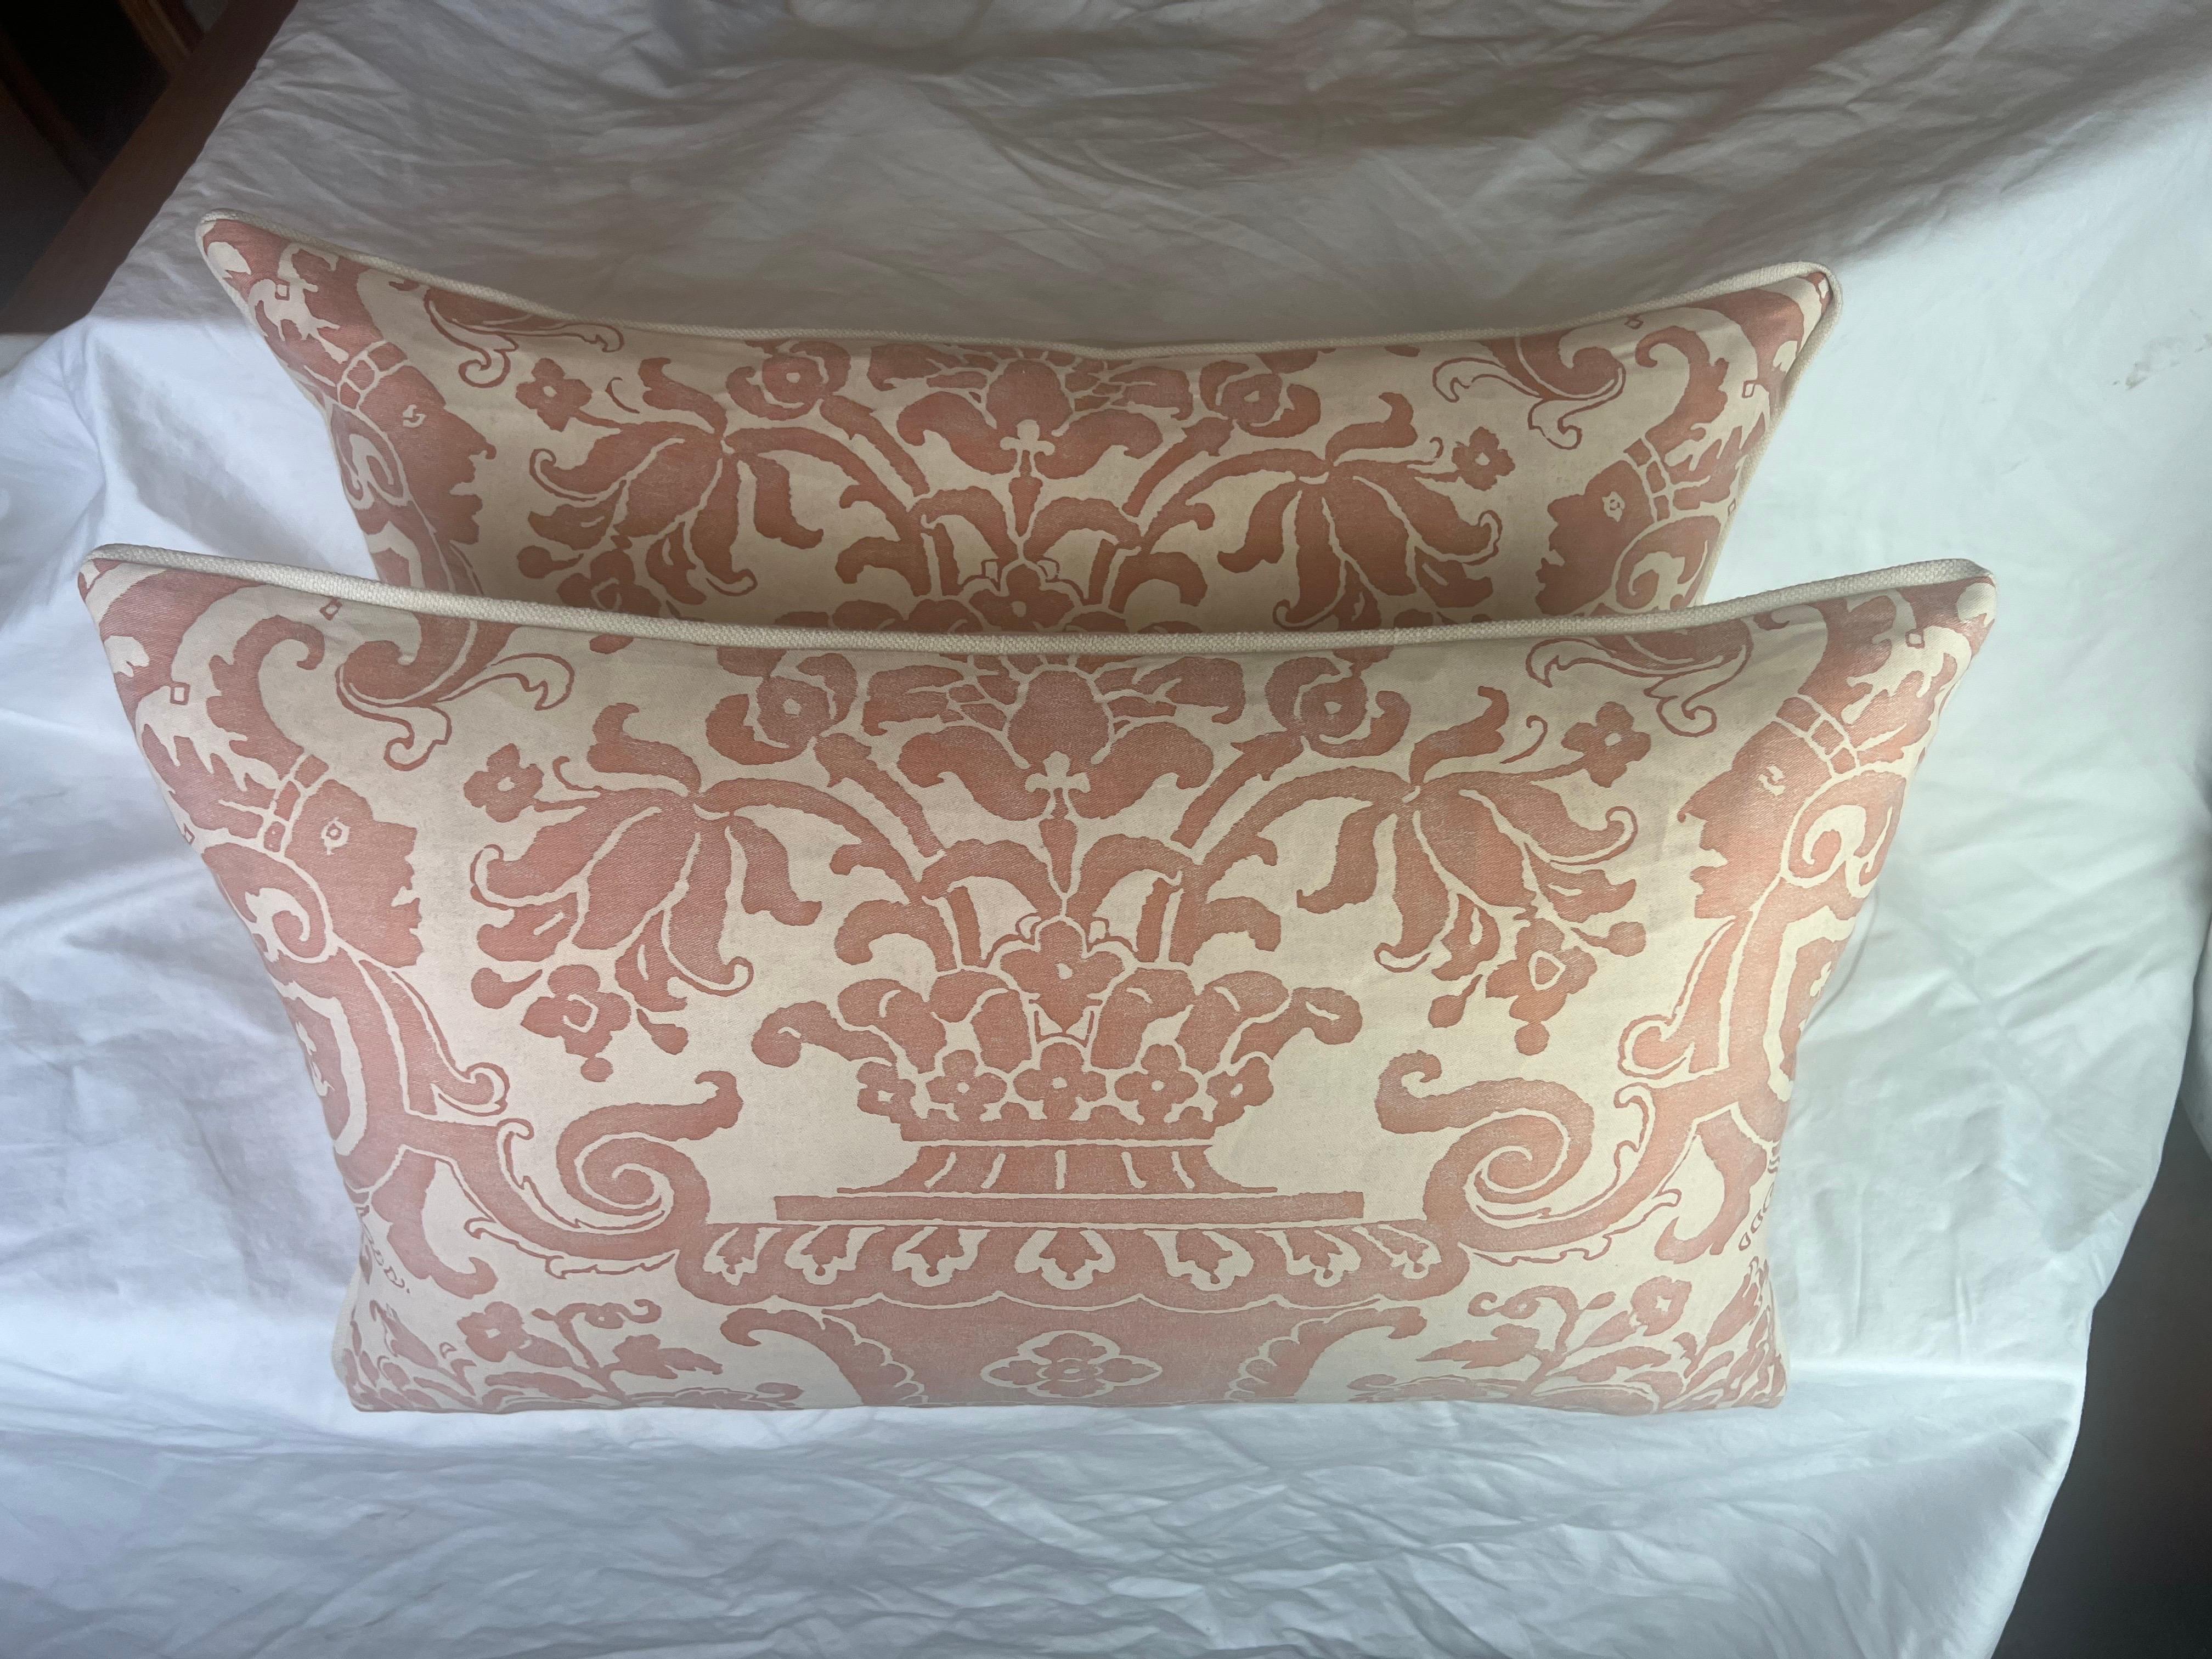 Pair of custom Carnavalet patterned Fortuny textile pillows in pink & cream.  The 17th Century inspired French design-with magnificent and intricate garden urns abundant with flowers-is framed by lavish cornucopia & elaborate scrolling swags. 